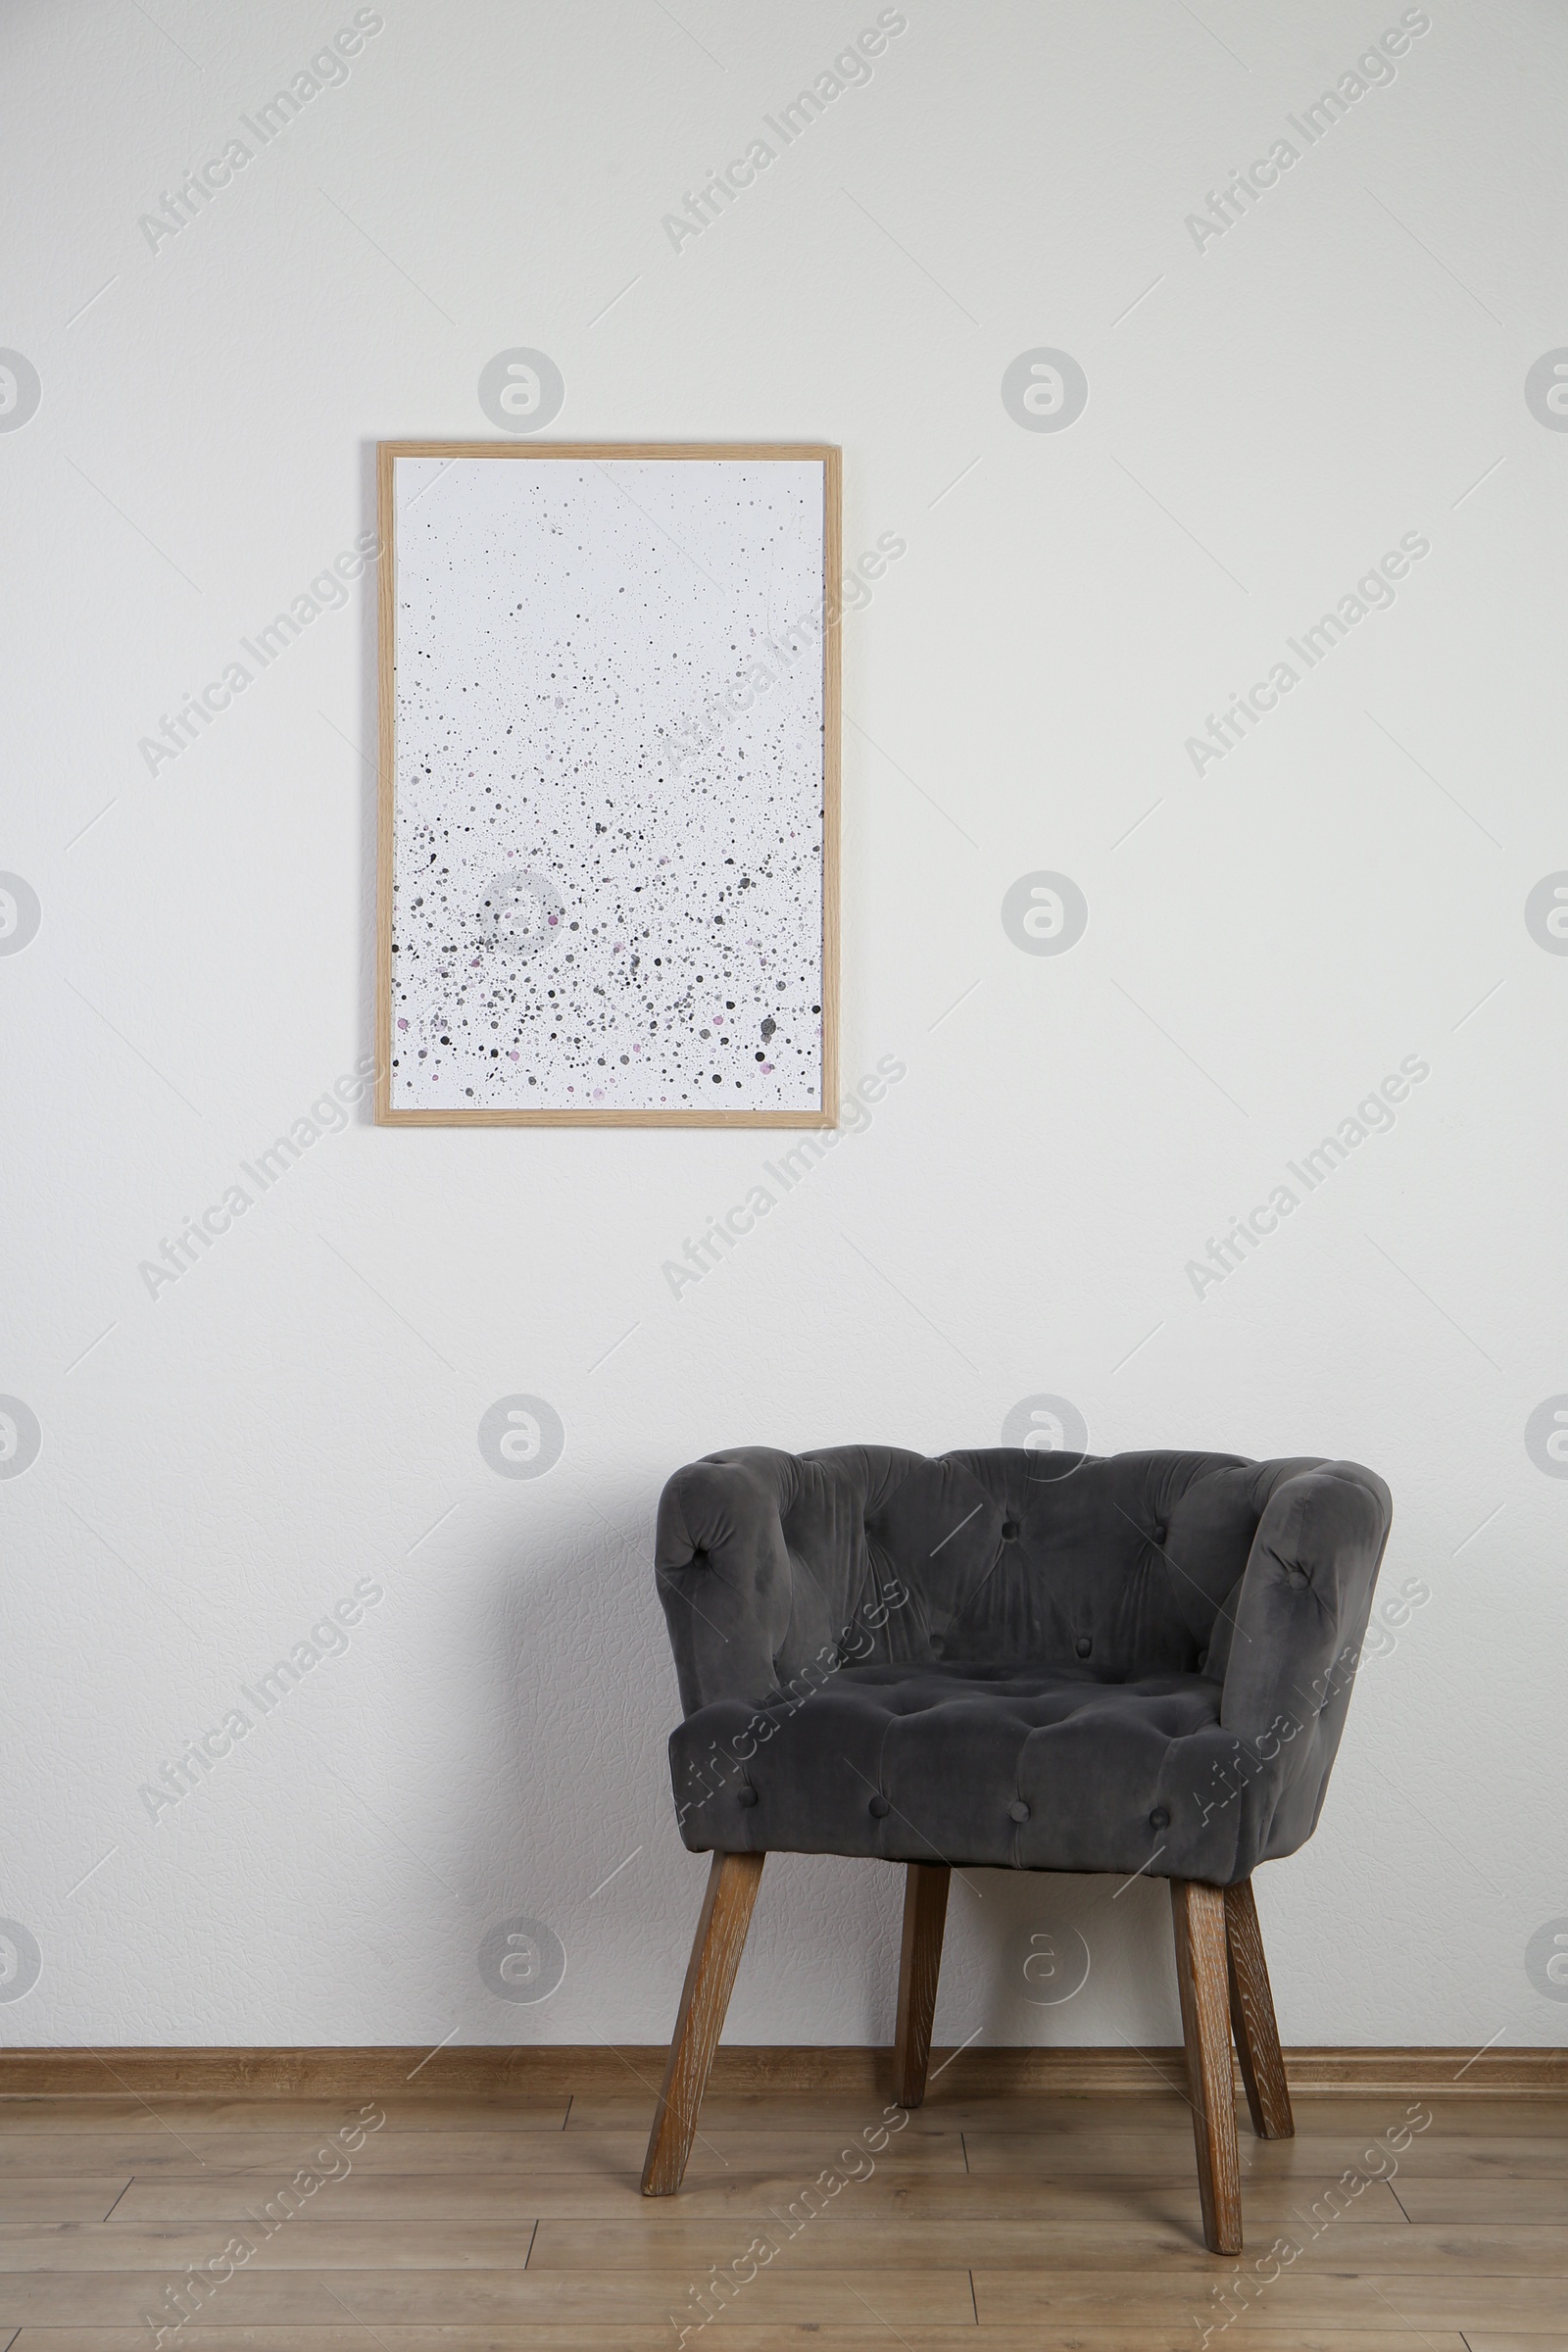 Photo of Comfortable armchair, cushion and picture frame on wall indoors. Interior element